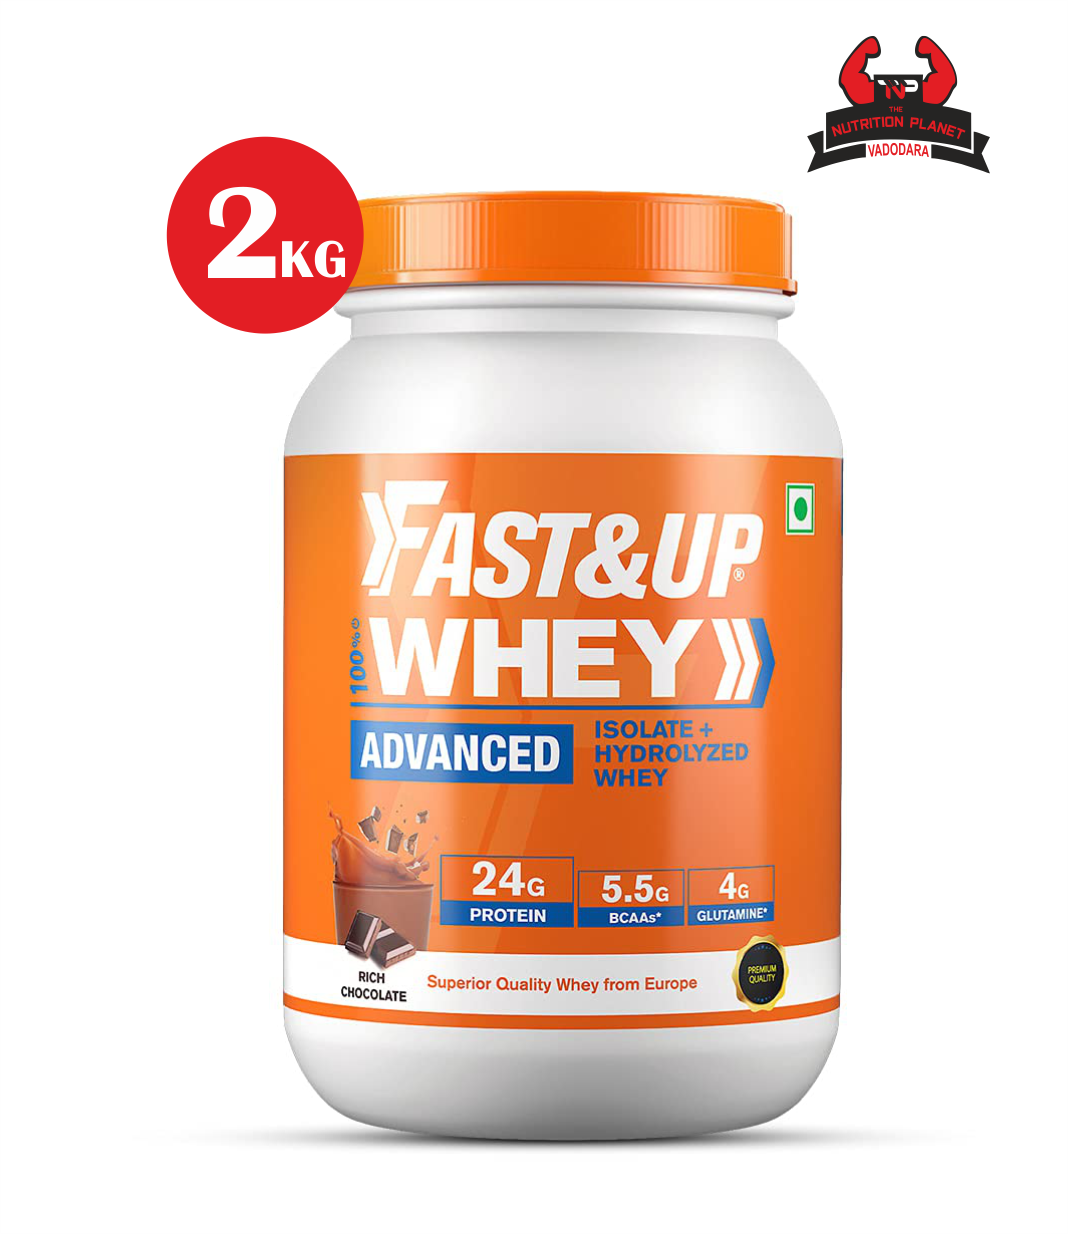 Fast&Up 100% Whey Isolate & Hydrolysate Whey Protein (Rich Chocolate, 30 Servings) - 24g Protein, 5.5g BCAA, 4g Glutamine (Rich Chocolate) - 2 KG